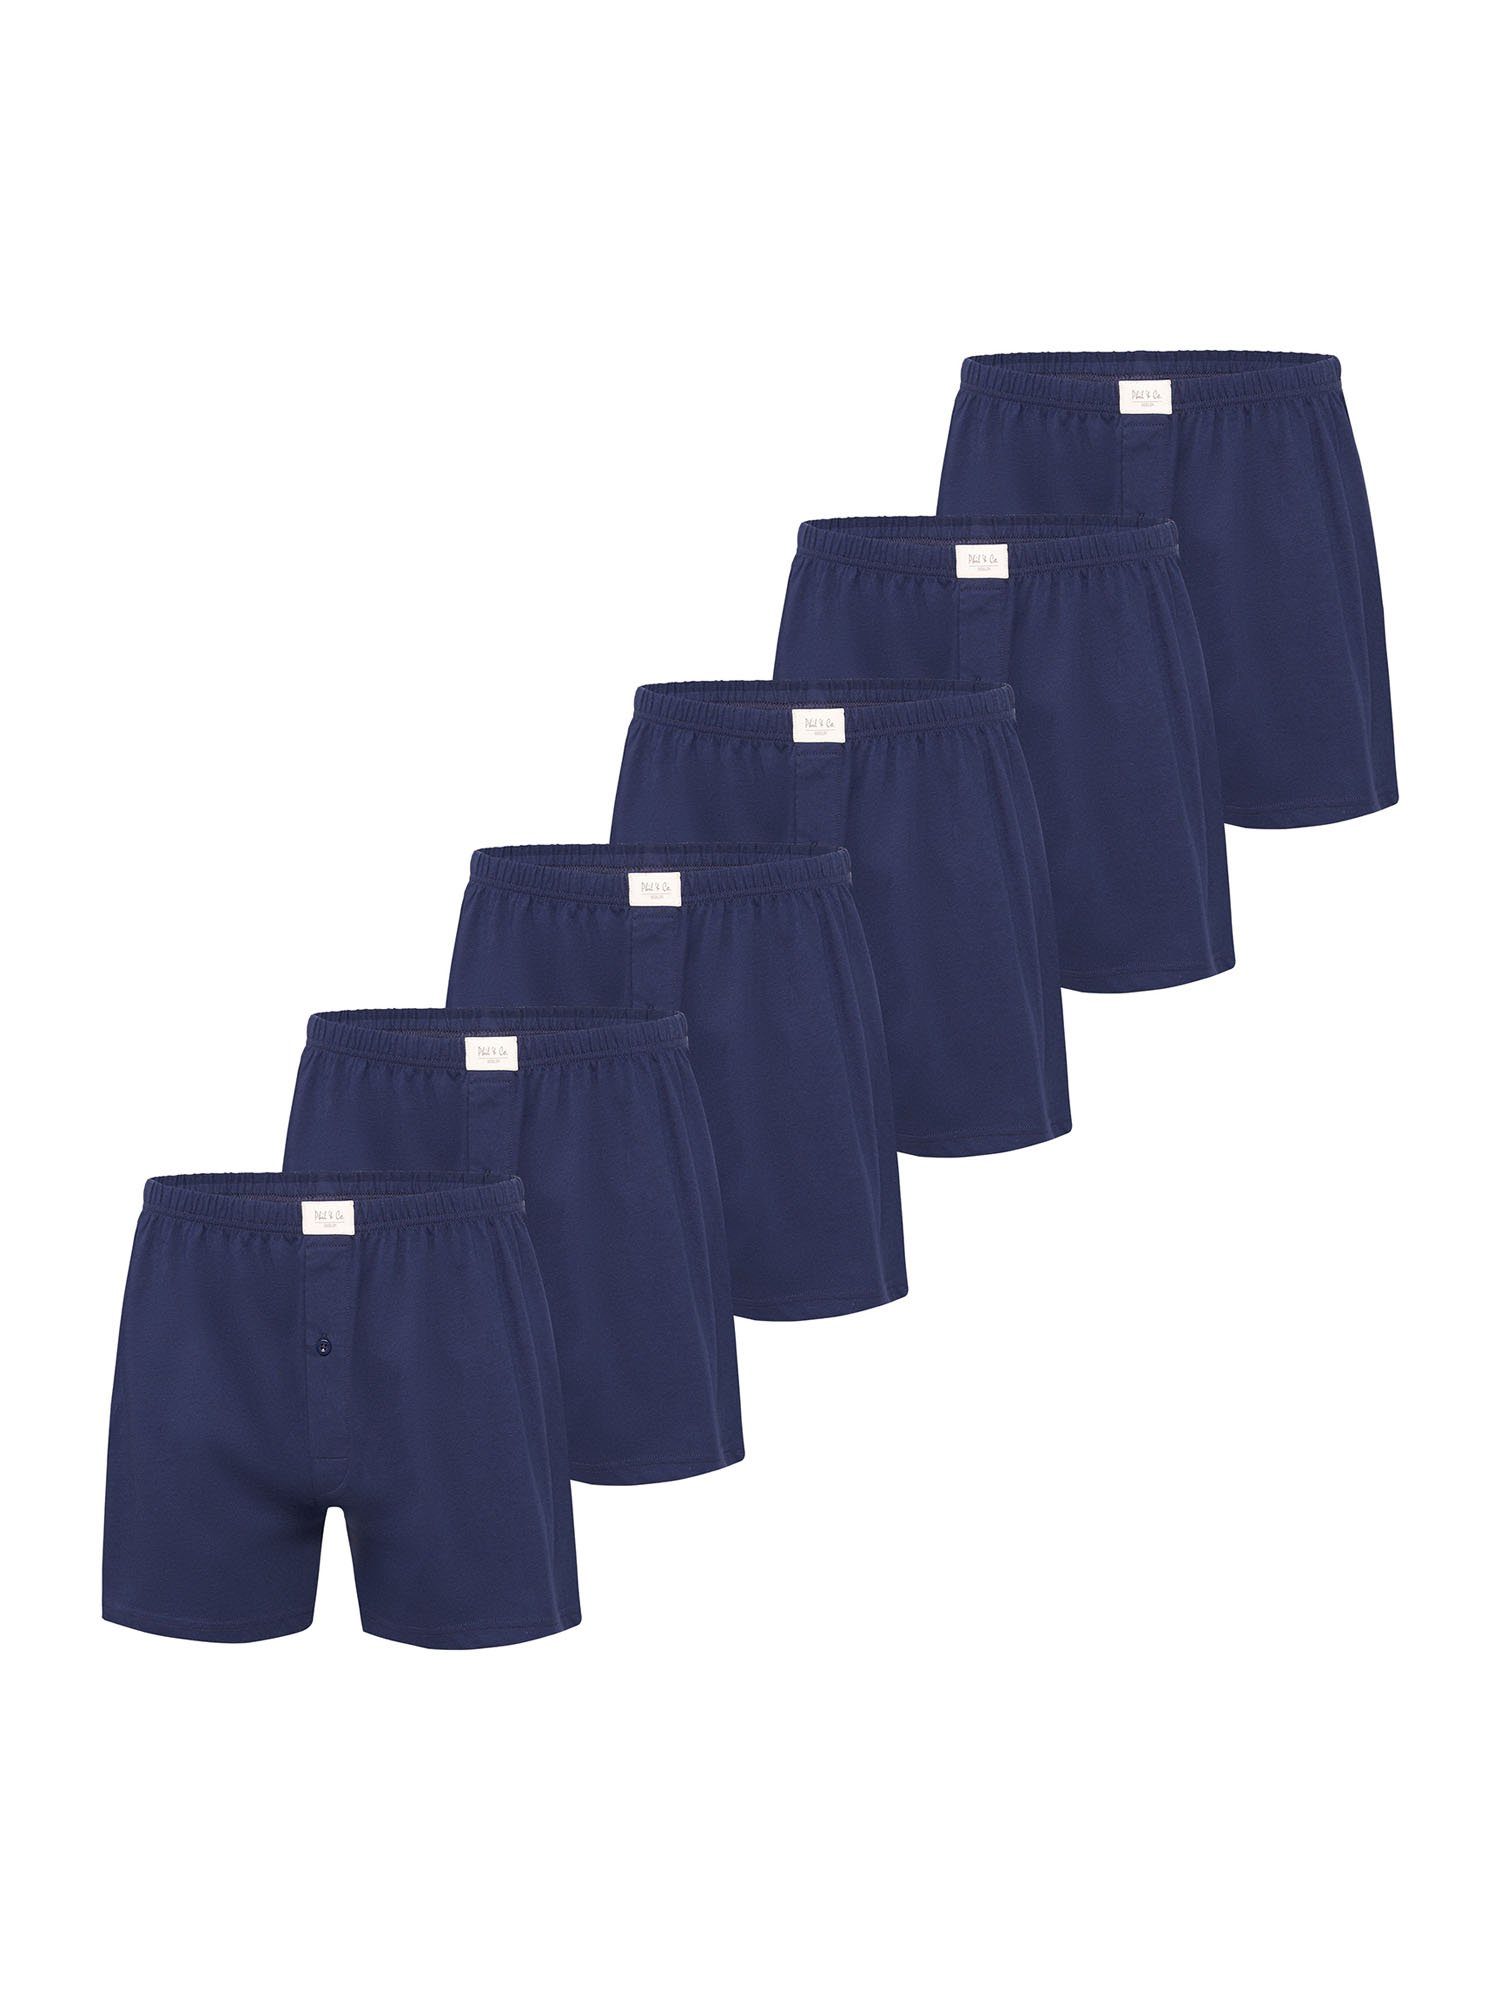 Phil & Co. Fit (6-St) Loose Boxer Jersey navy